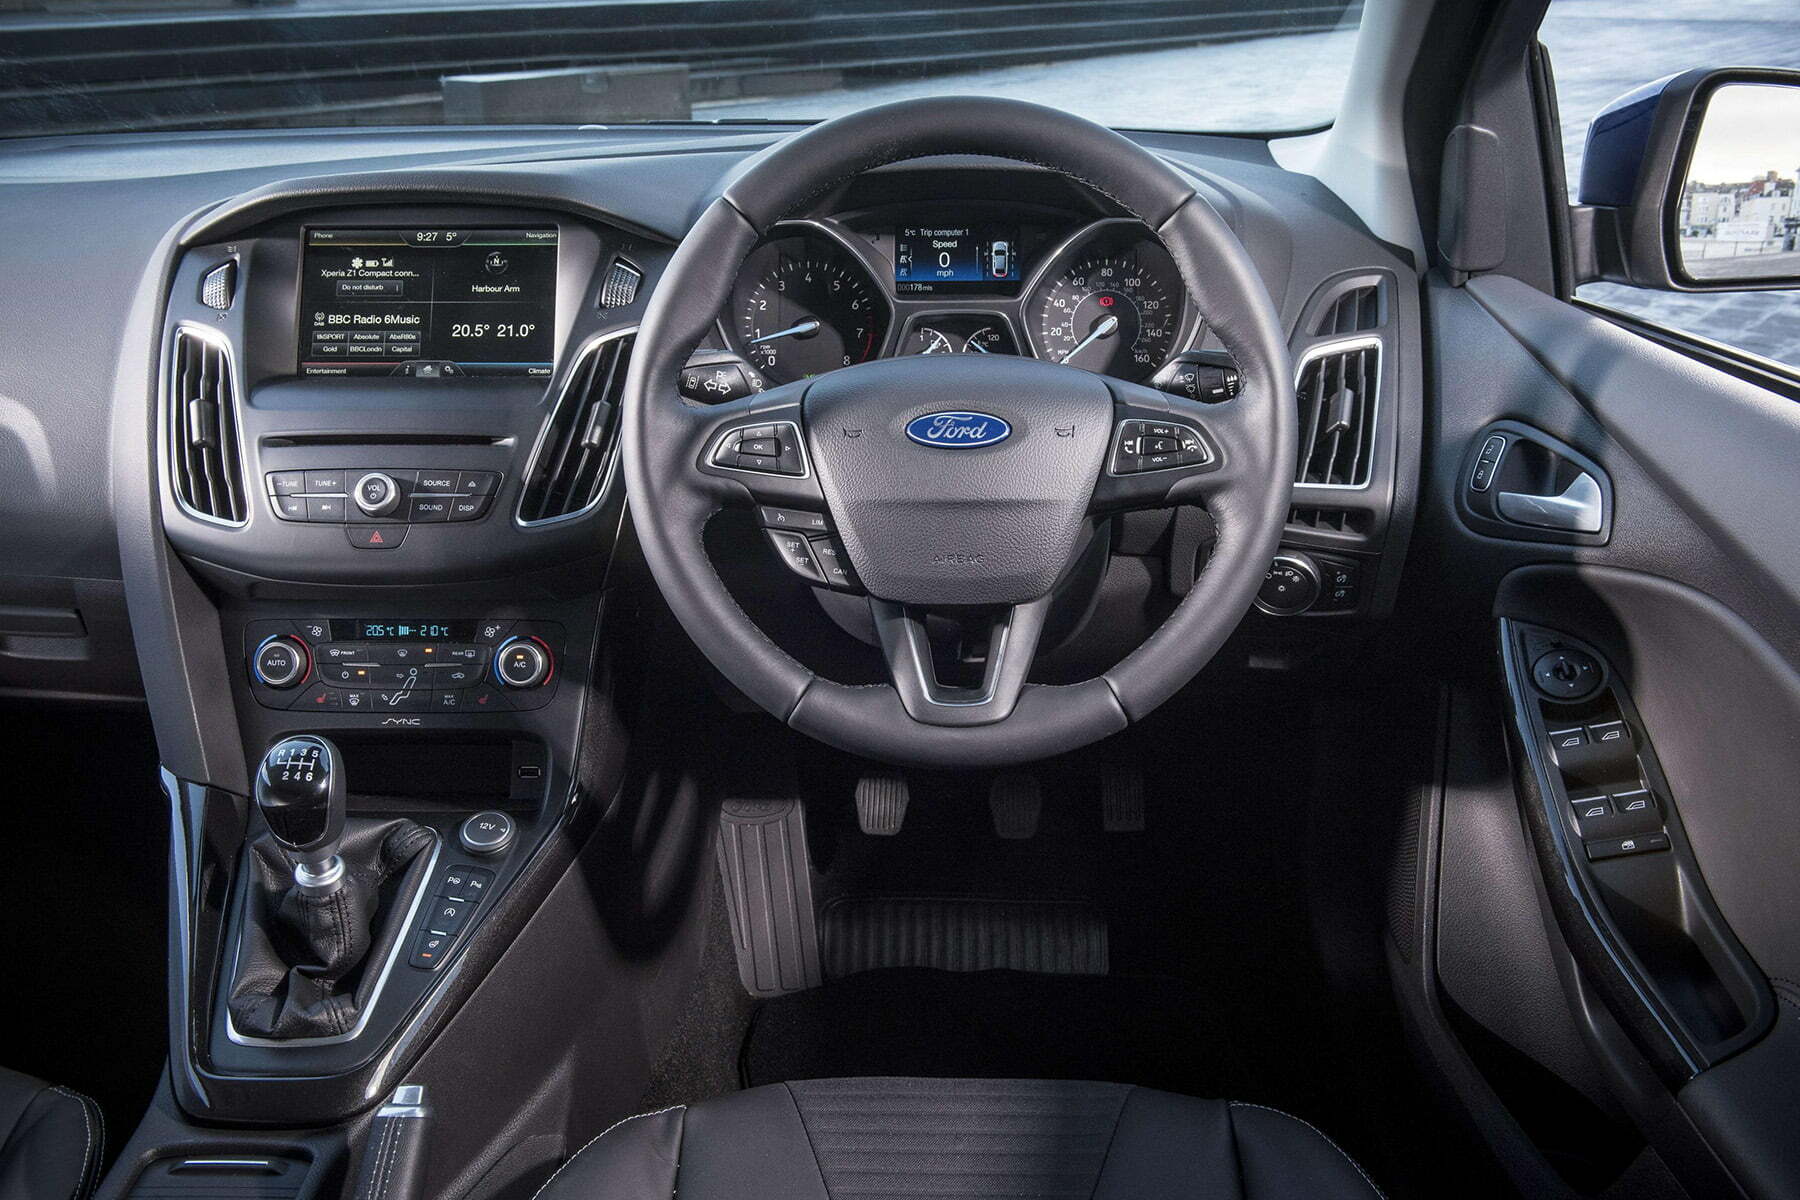 Ford Focus (2011 - 2018) interior view | Expert Rating